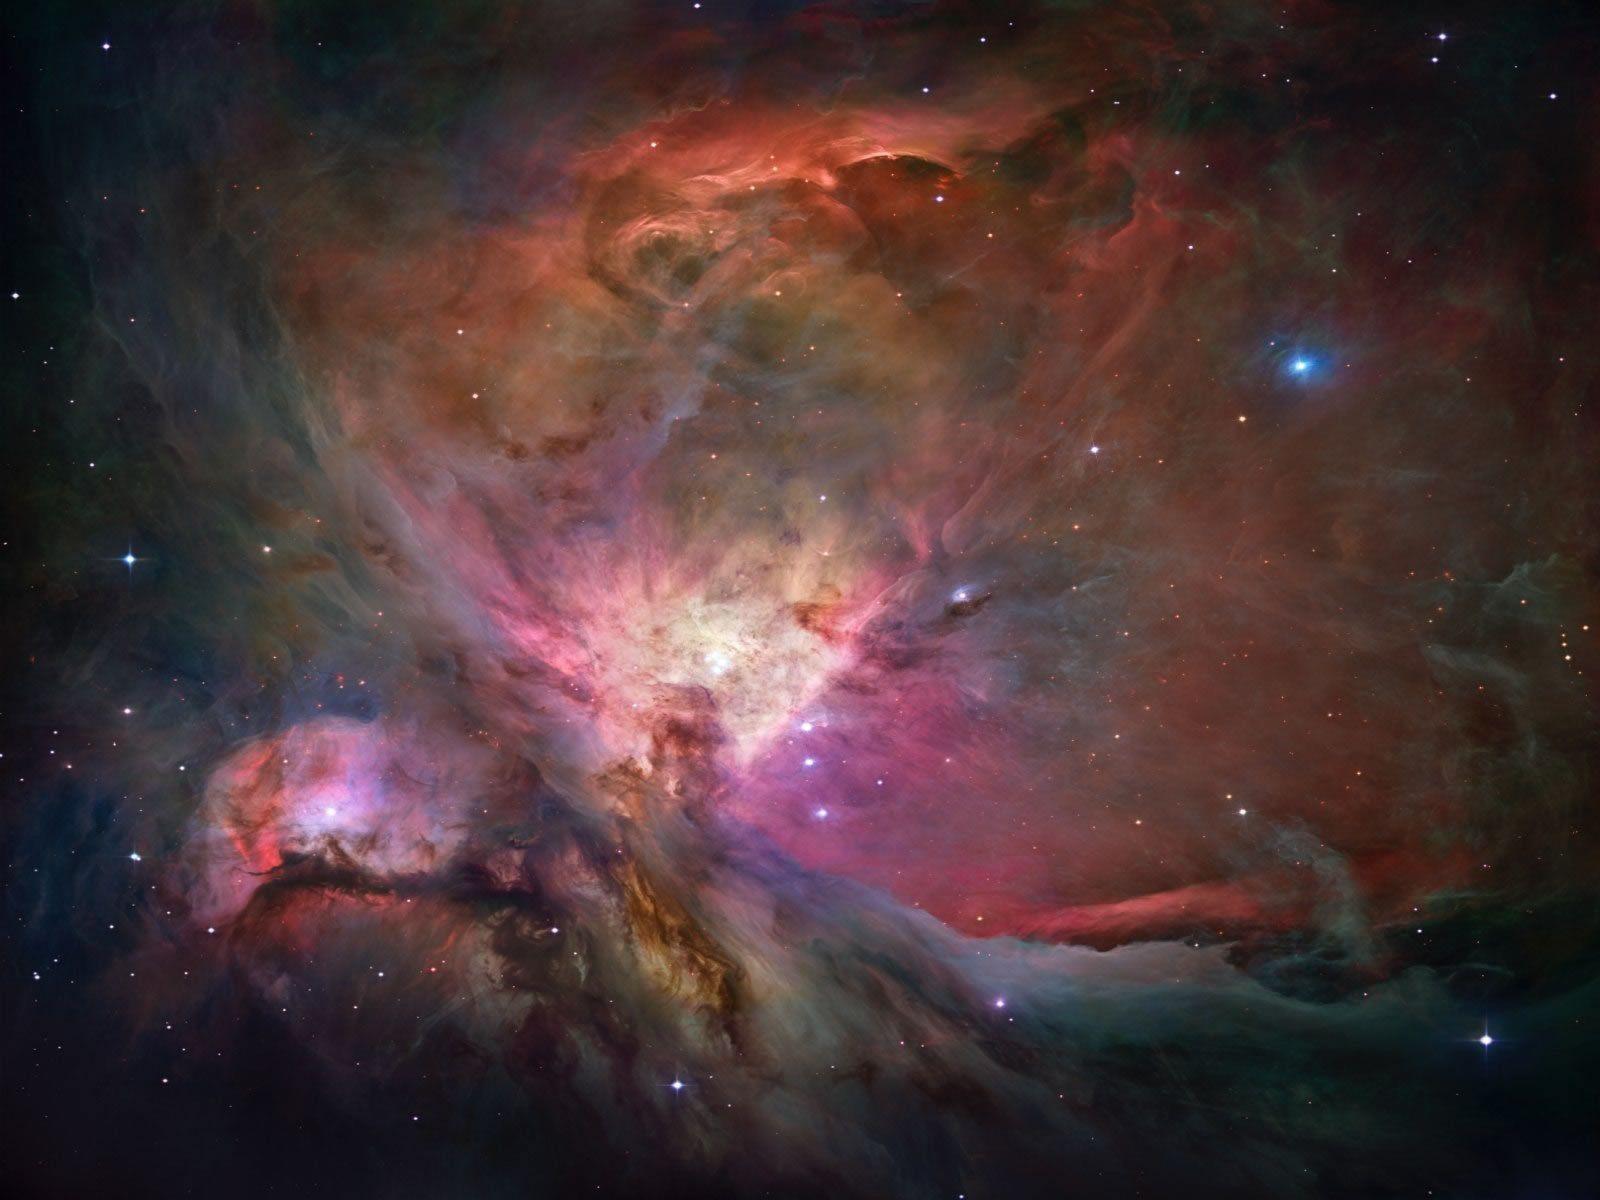 Orion Nebula Hubble 2006 Mosaic 1600 Pic Picture To Download For Free